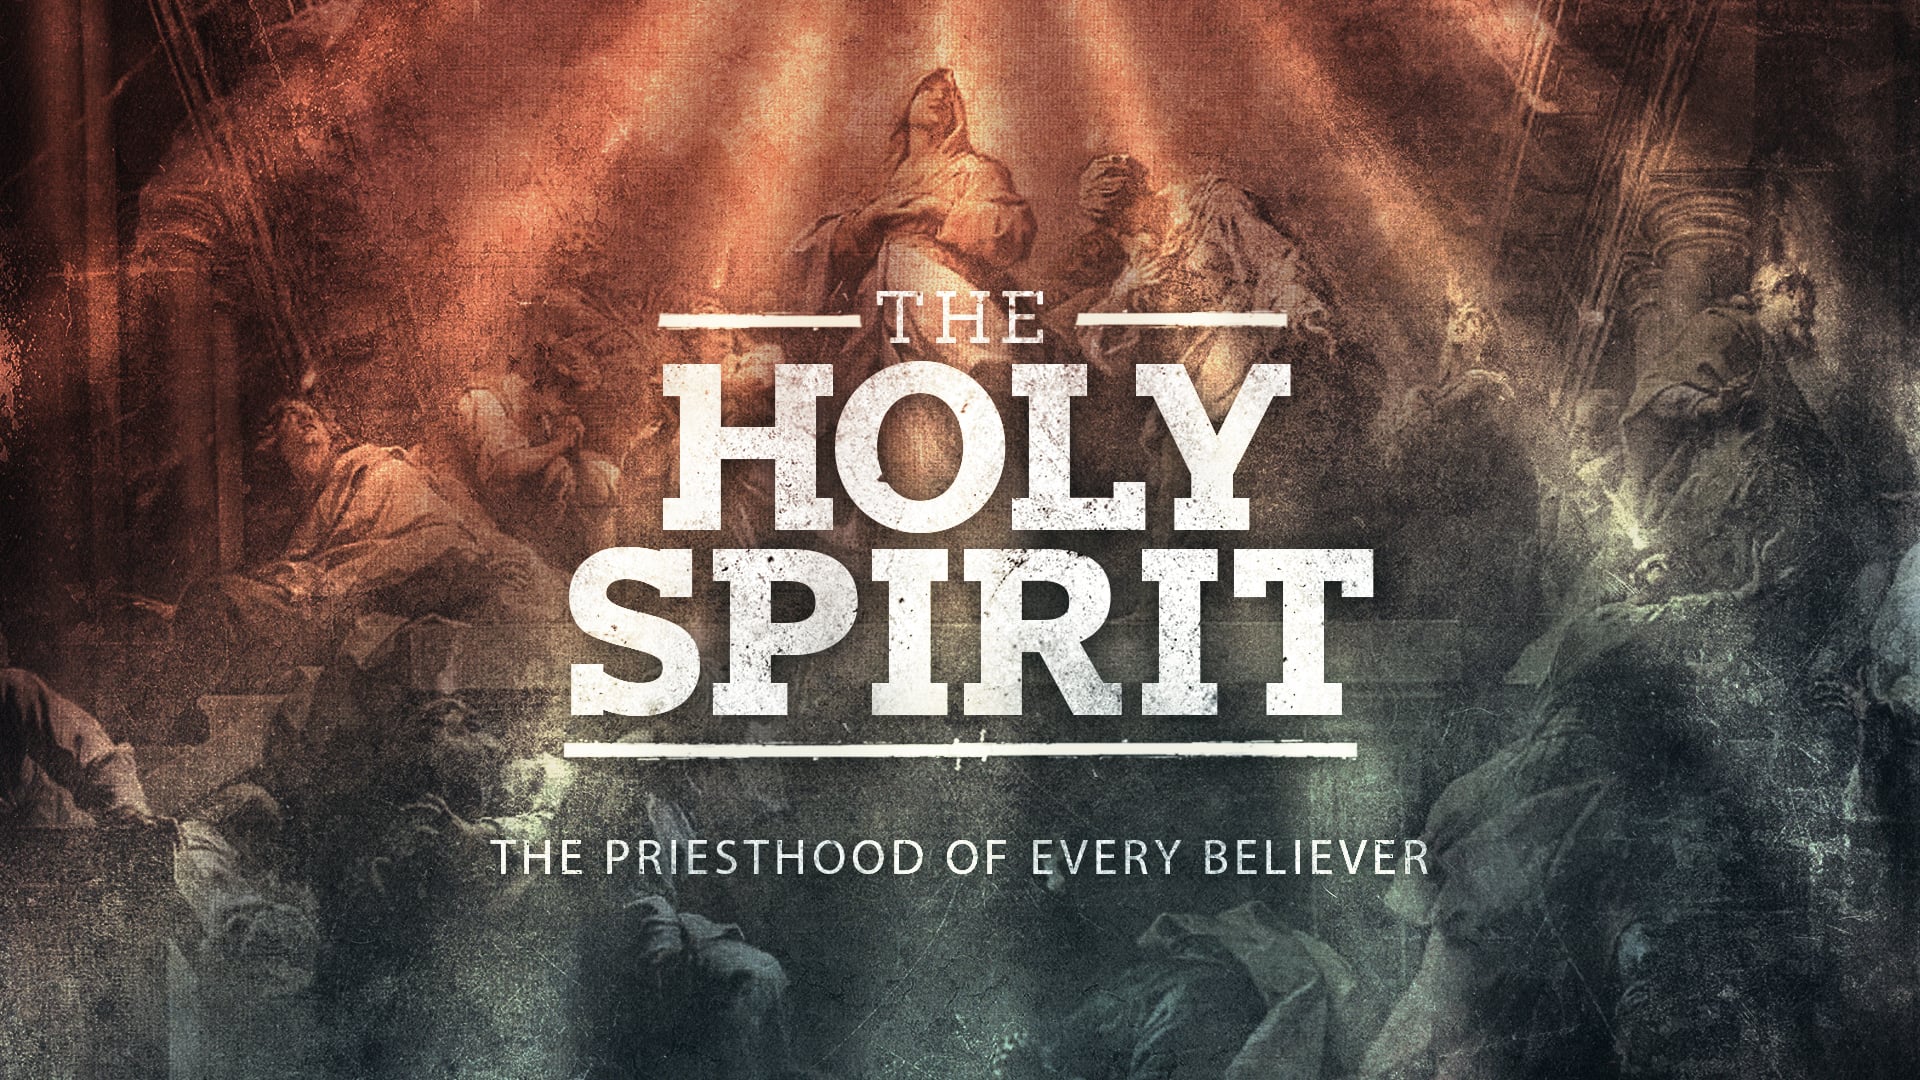 The Priesthood of Every Believer